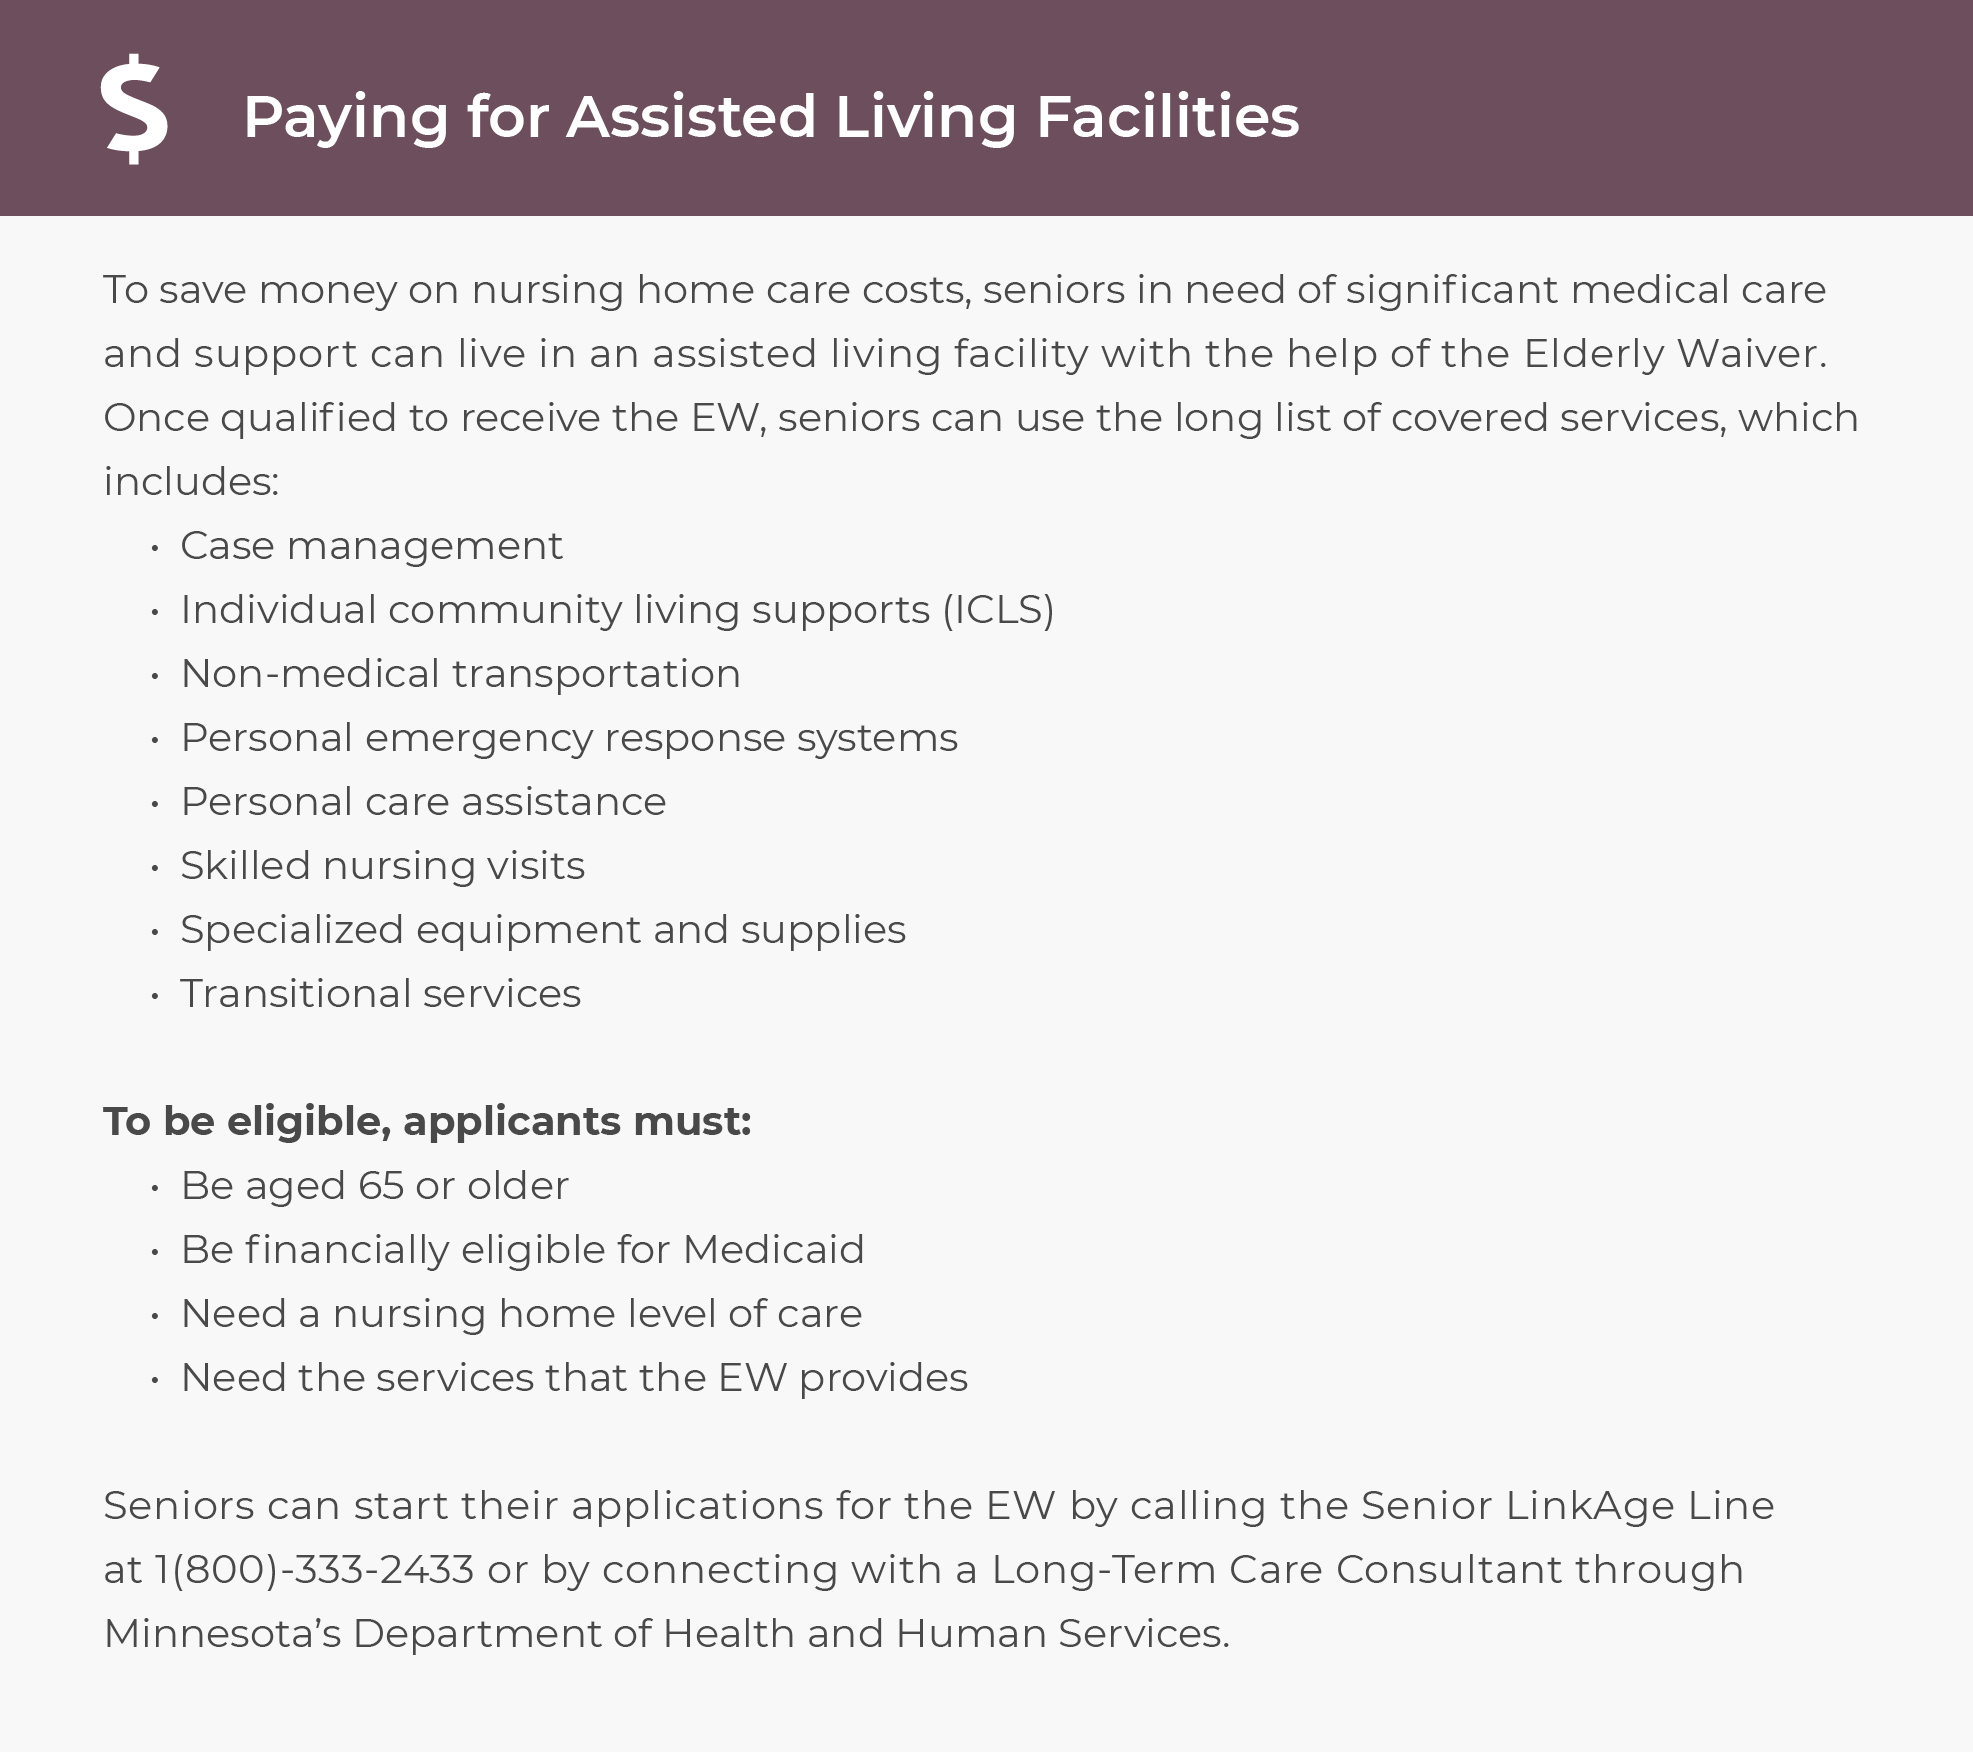 Paying for Assisted Living Facilities in Minnesota